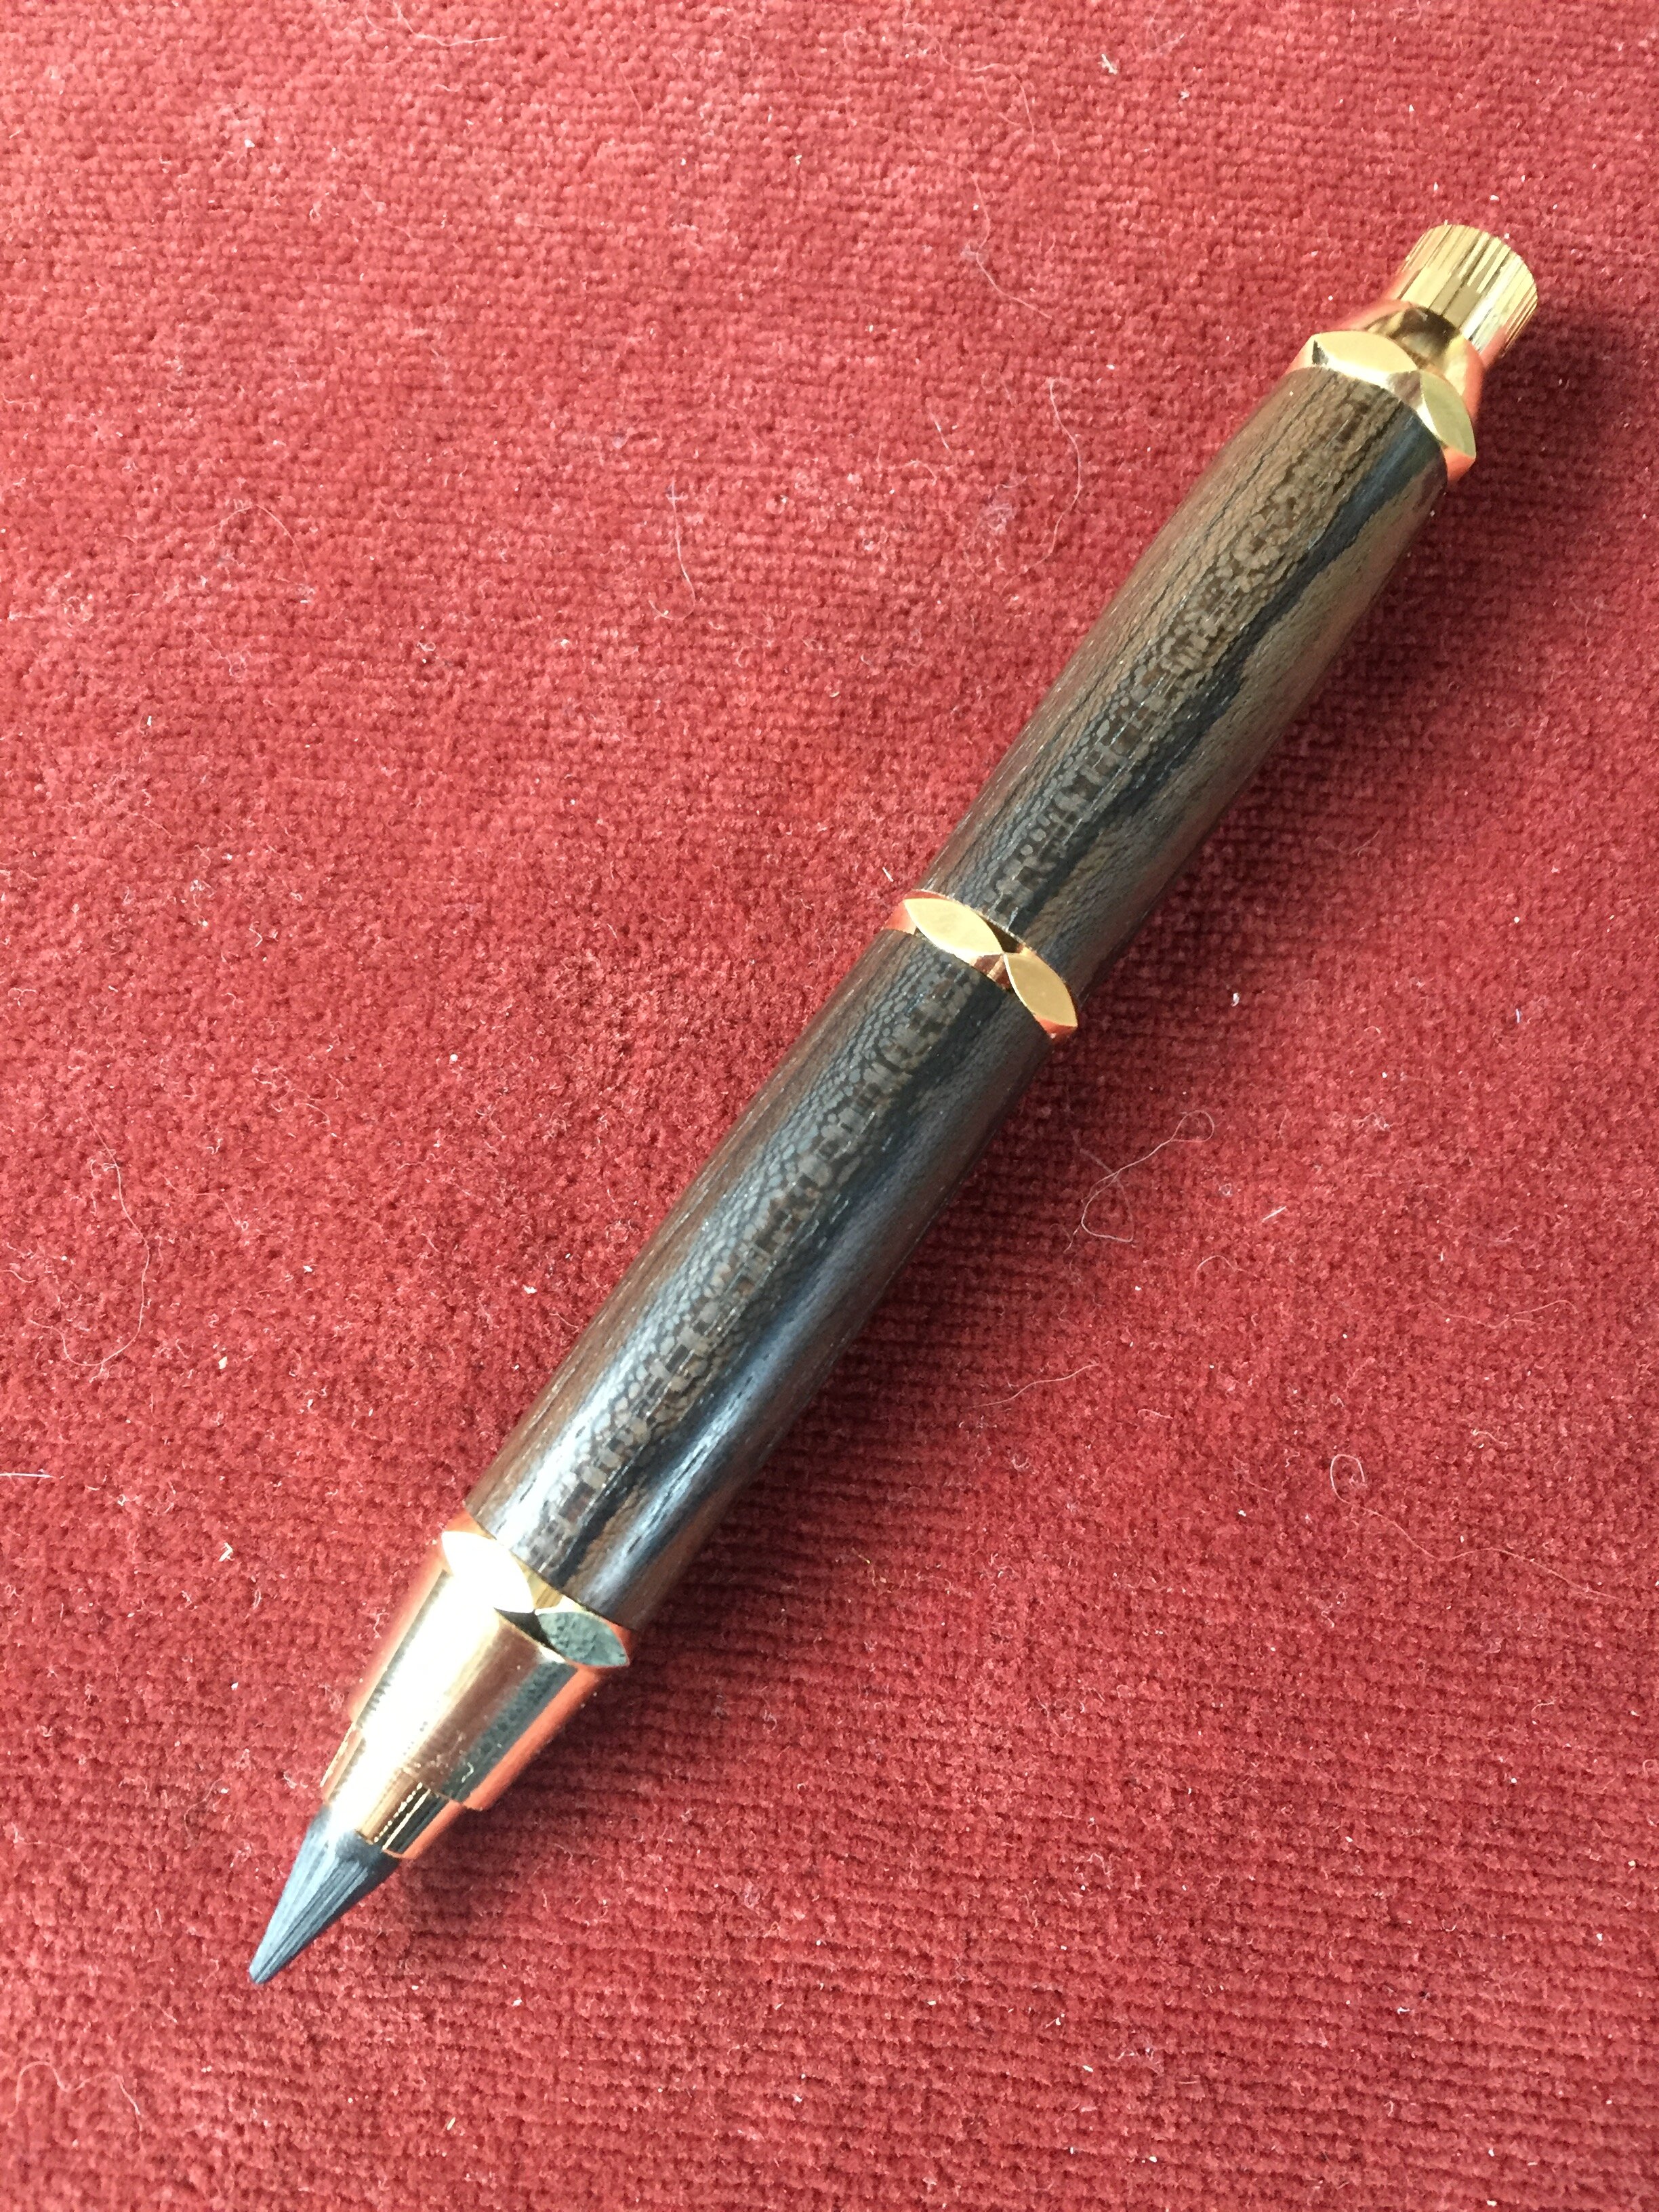 Walnut on carpenter's pencil in gold from William Wood Write